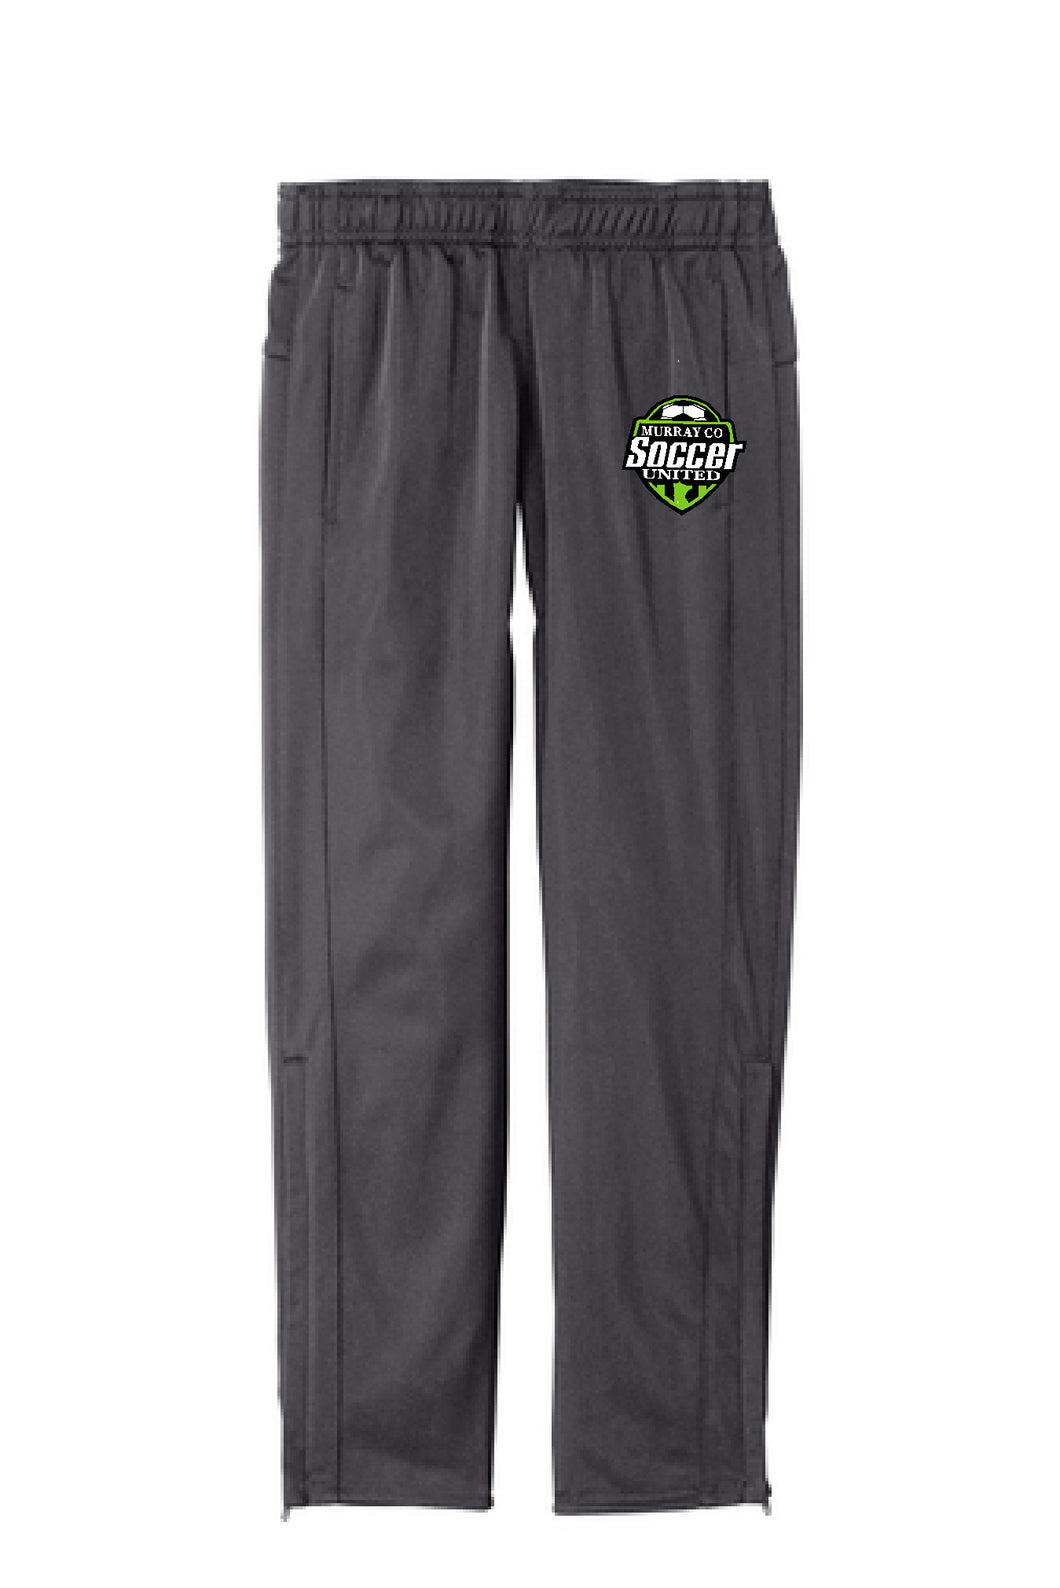 MURRAY COUNTY SOCCER UNITED GREY TRACK PANTS